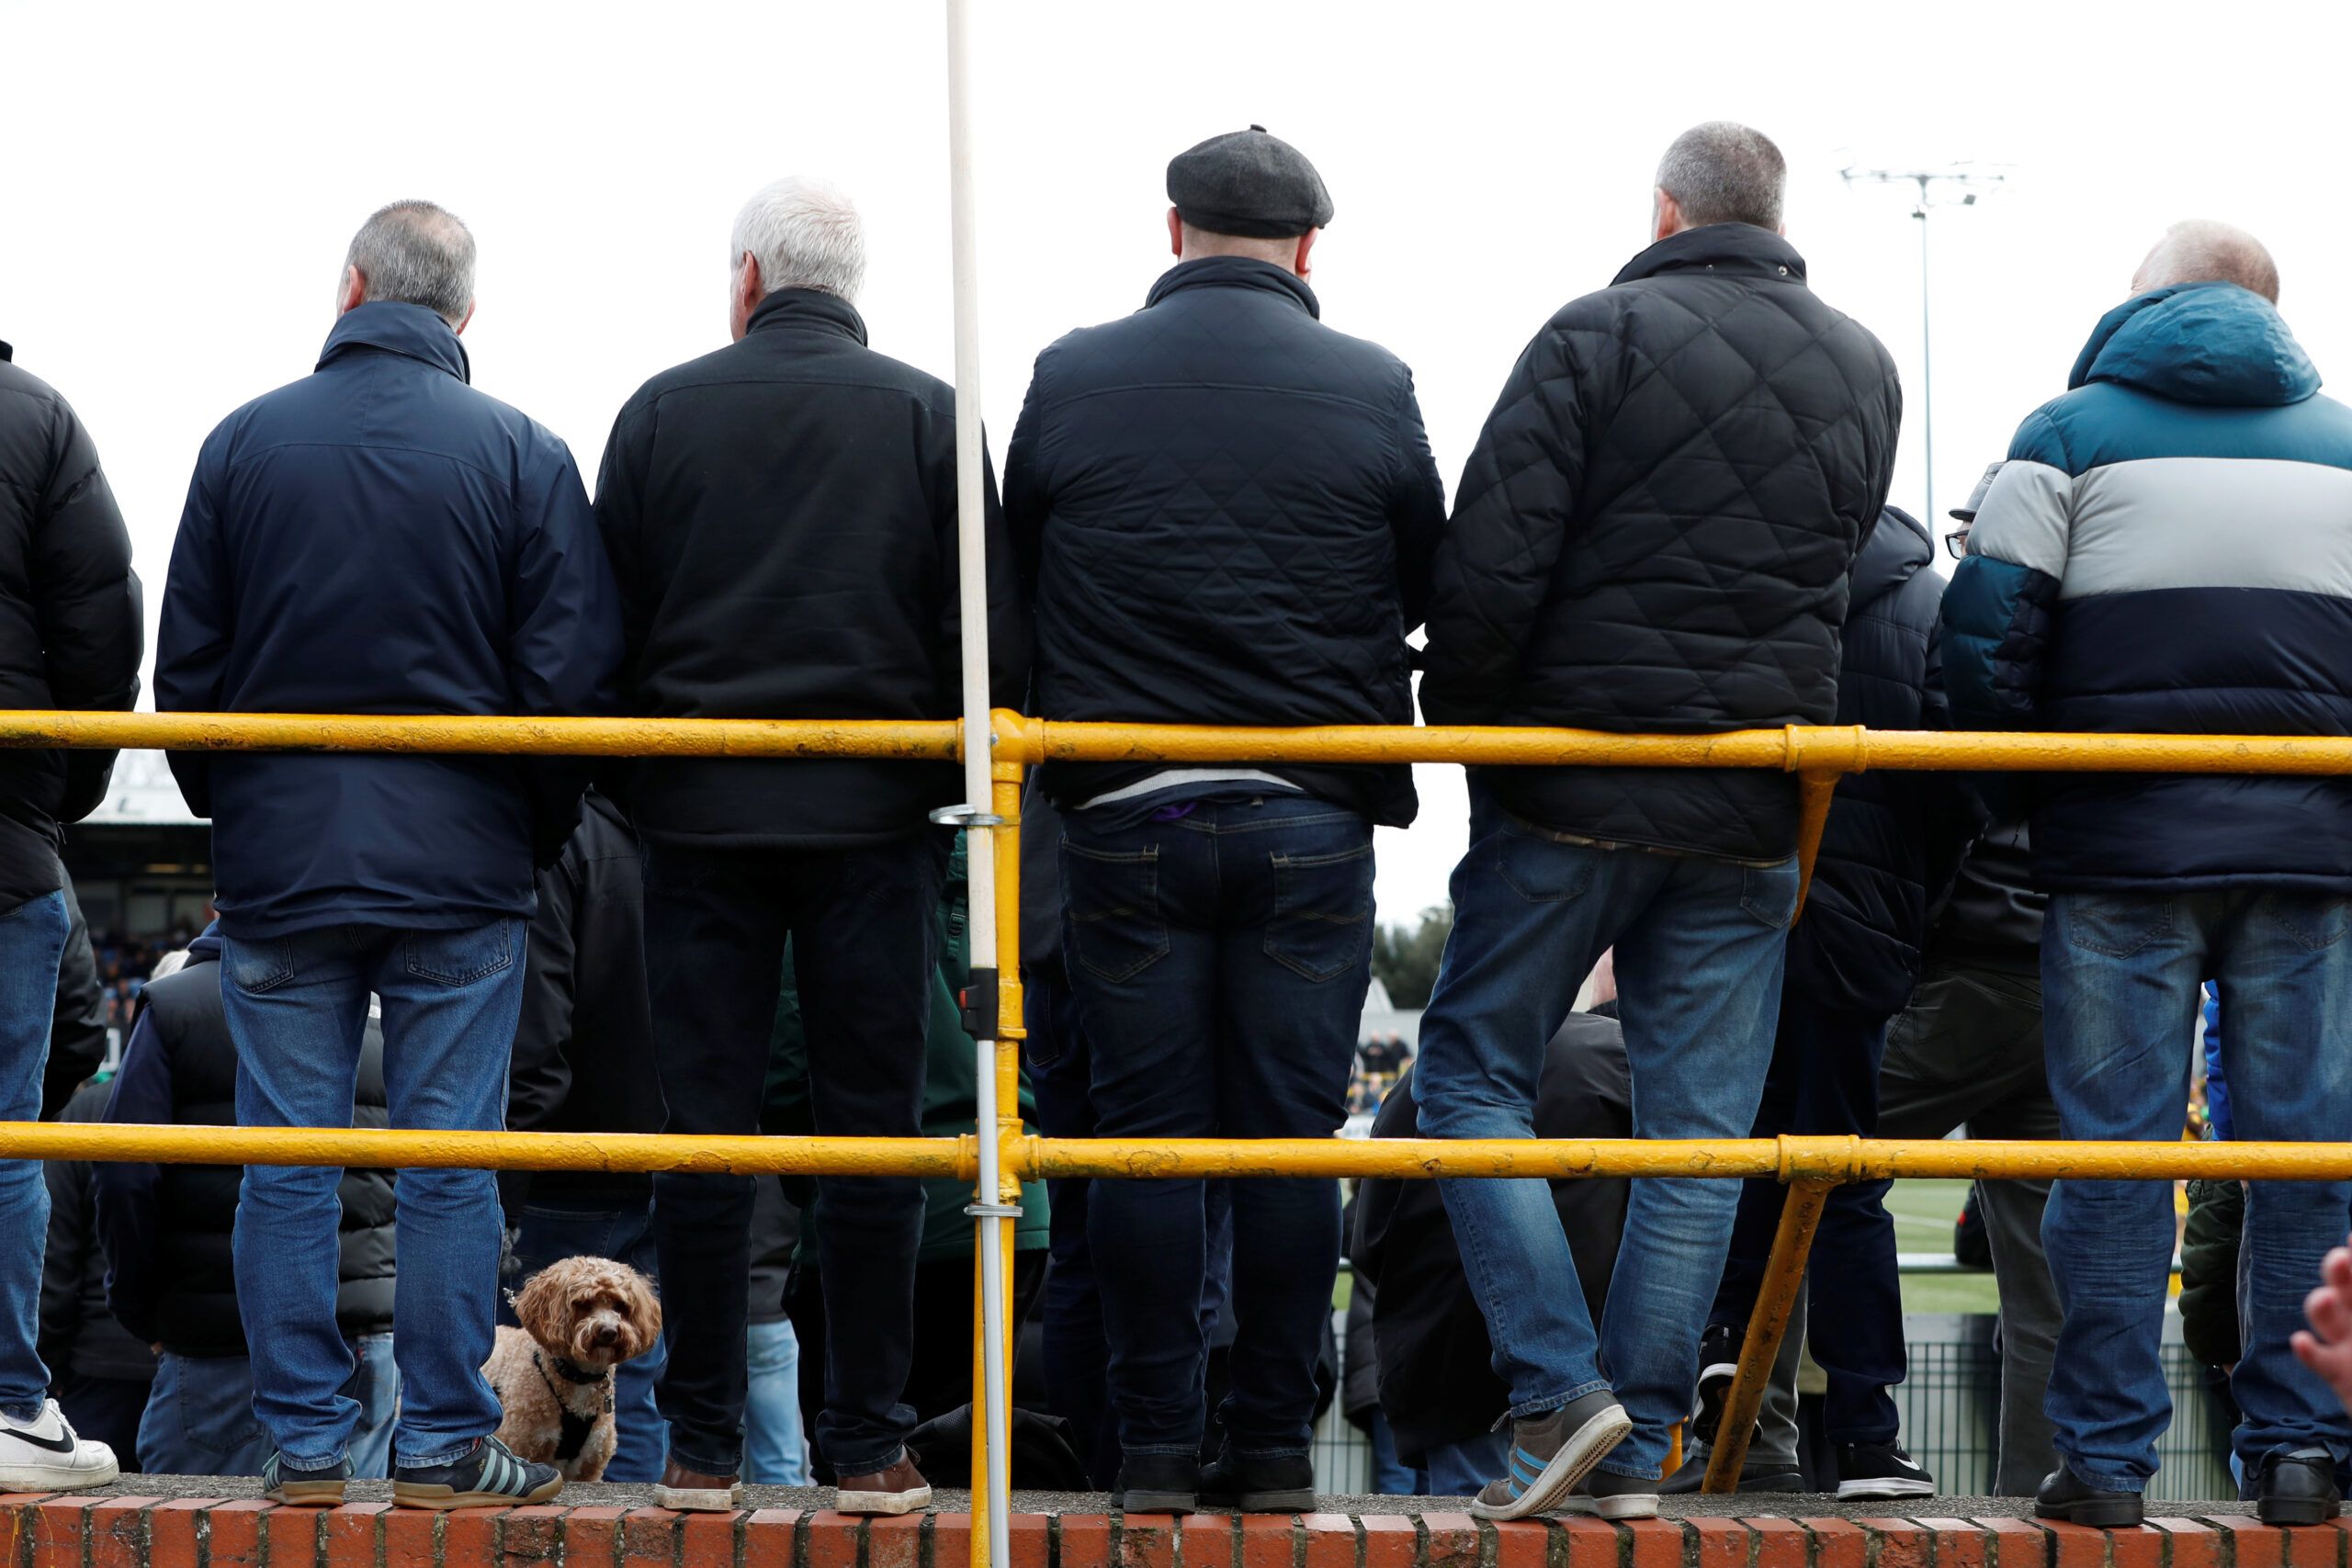 Soccer Football - Conference Premier - Sutton United v Hartlepool United - Borough Sports Ground, Sutton, Britain - March 14, 2020   Fans and a dog in the stands as the game goes ahead despite many football matches in the UK suspended due to the number of coronavirus cases growing around the world    Action Images via Reuters/Paul Childs    EDITORIAL USE ONLY. No use with unauthorized audio, video, data, fixture lists, club/league logos or 